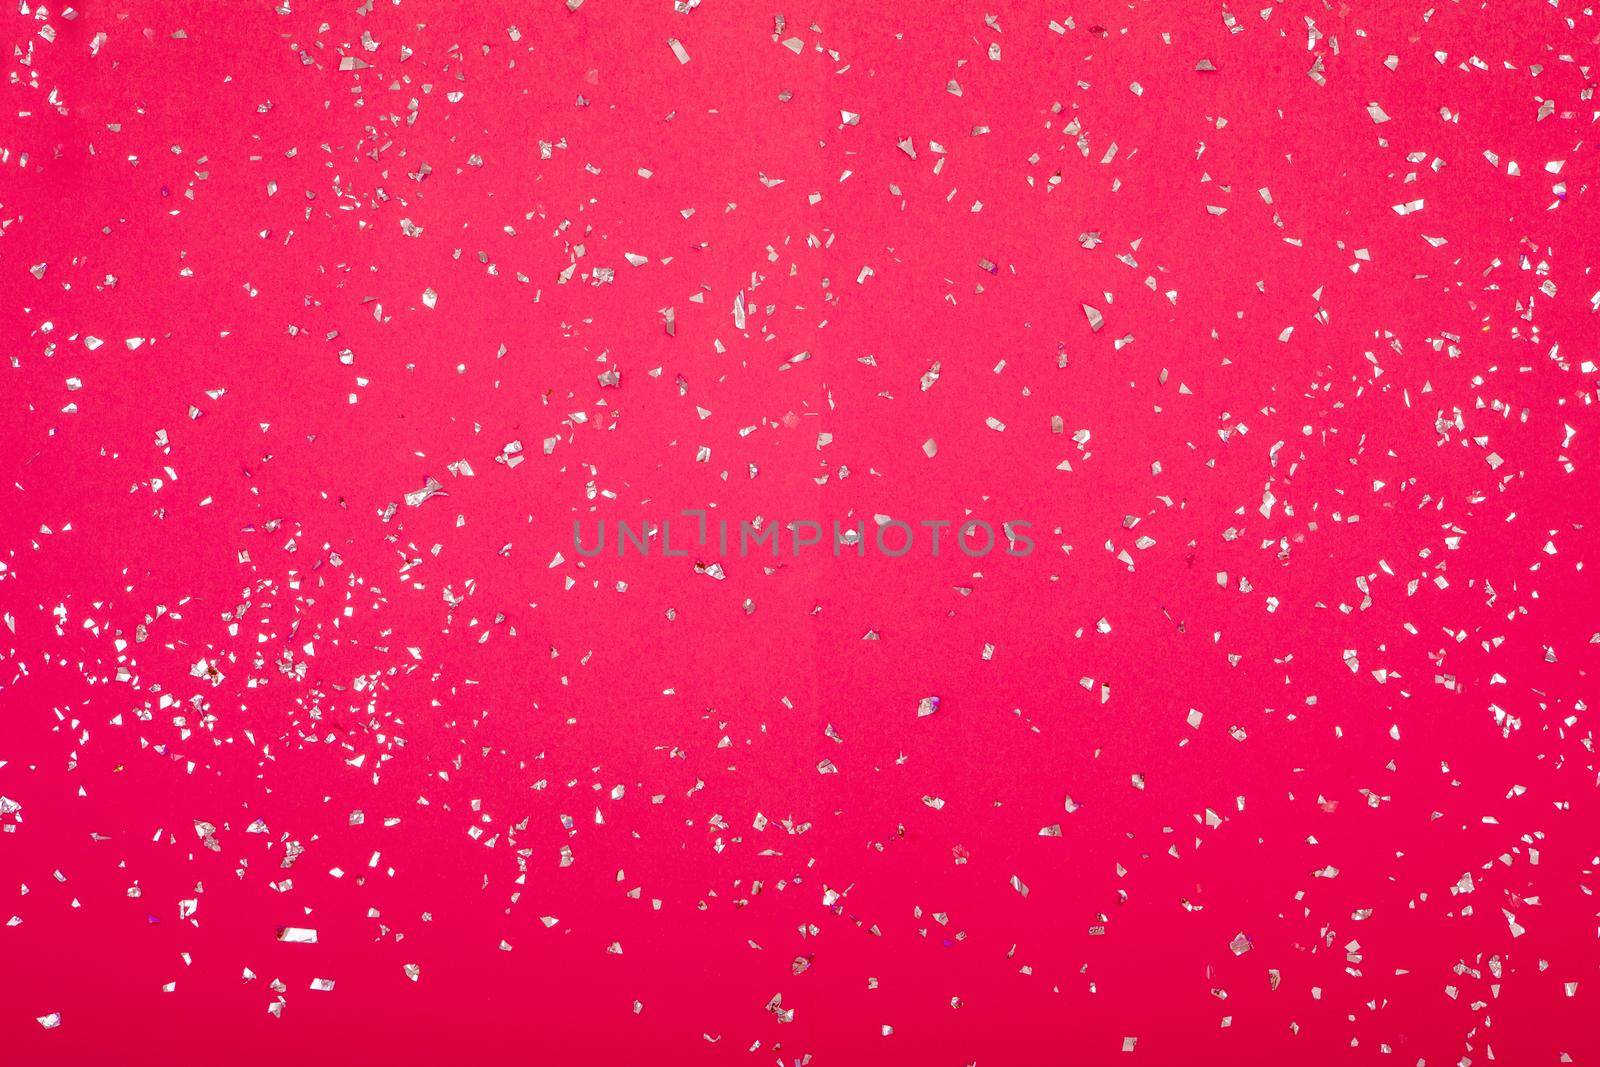 Silver sparkles scattered randomly on juicy pink background. Silver confetti on a pinkbackground. Holidays banner with place for text